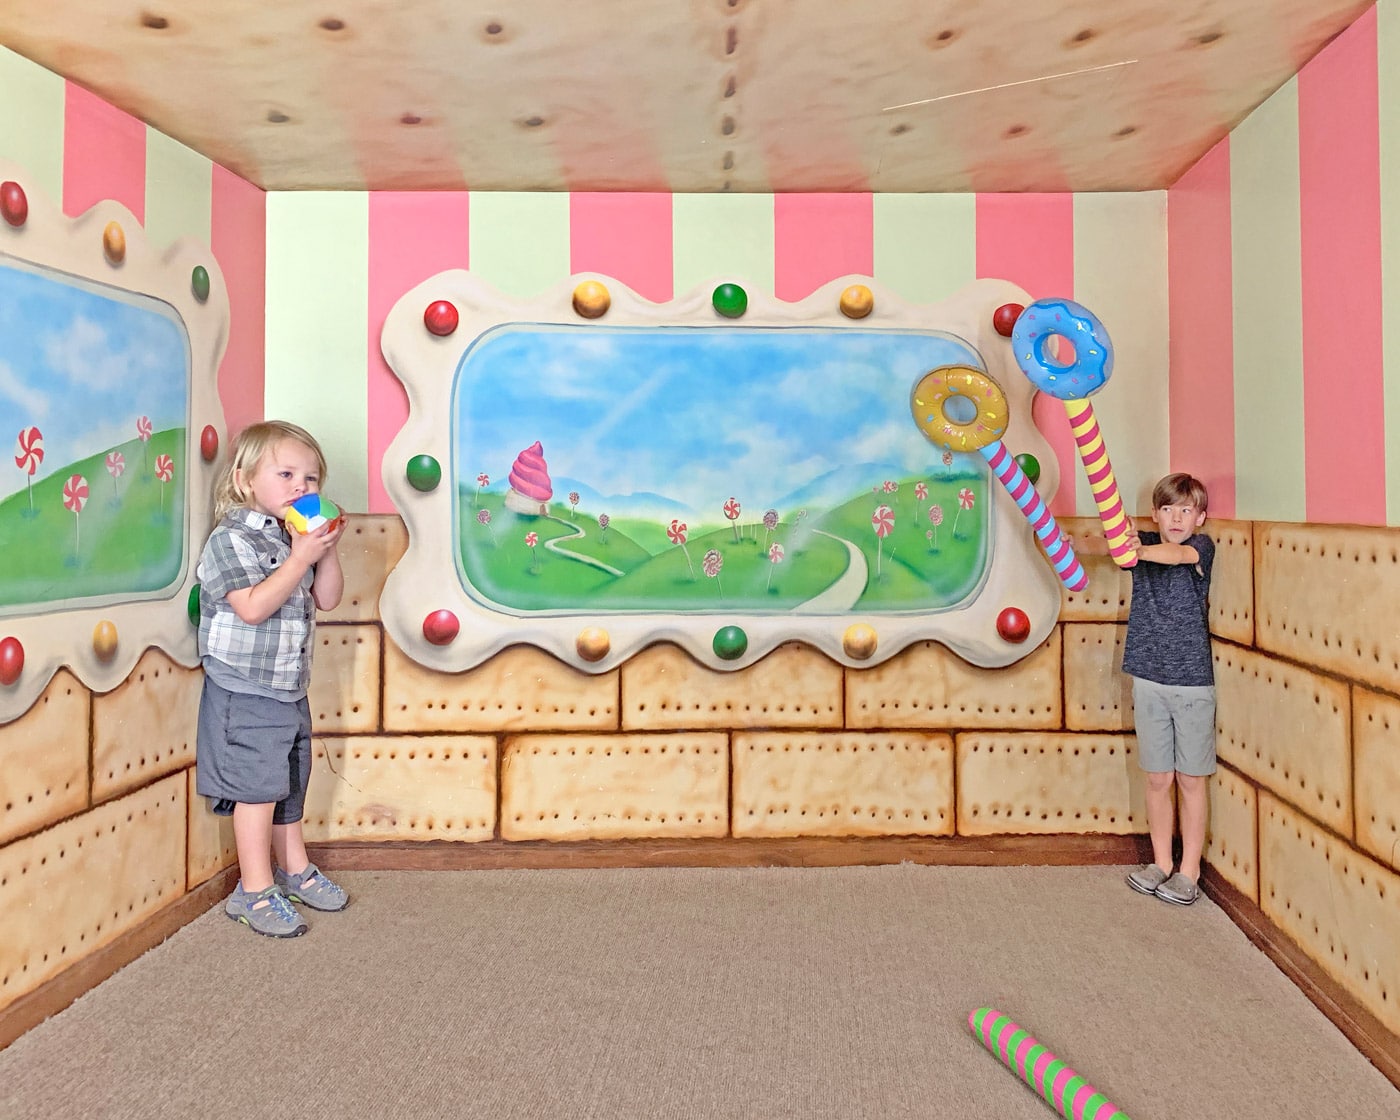 Toddler and preschooler in giant illusion room